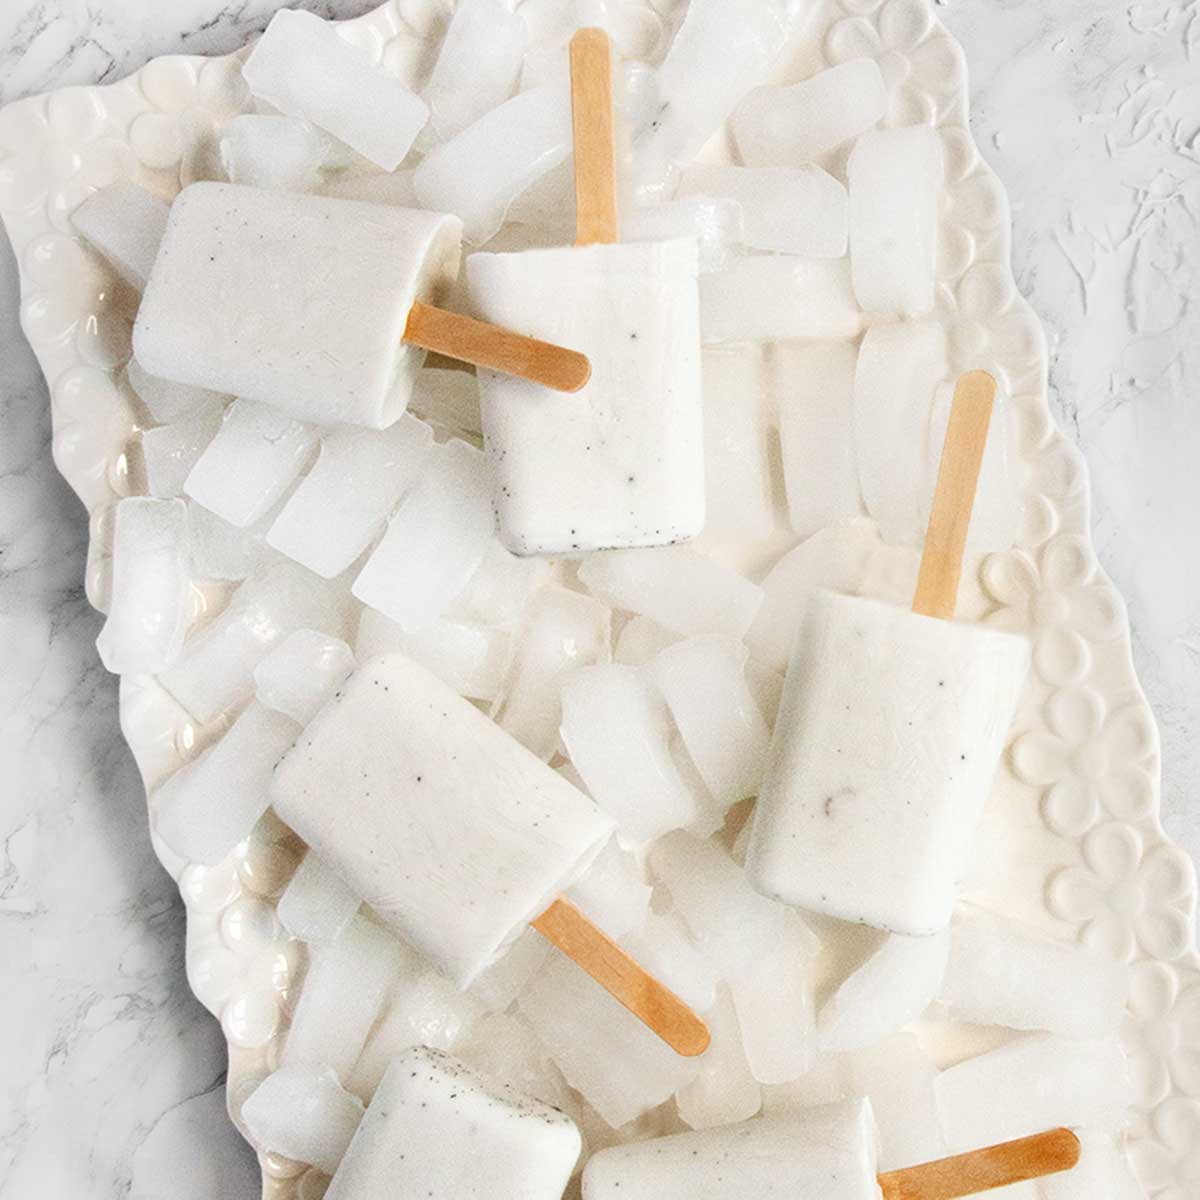 Six coconut milk popsicles on a platter filled with ice.